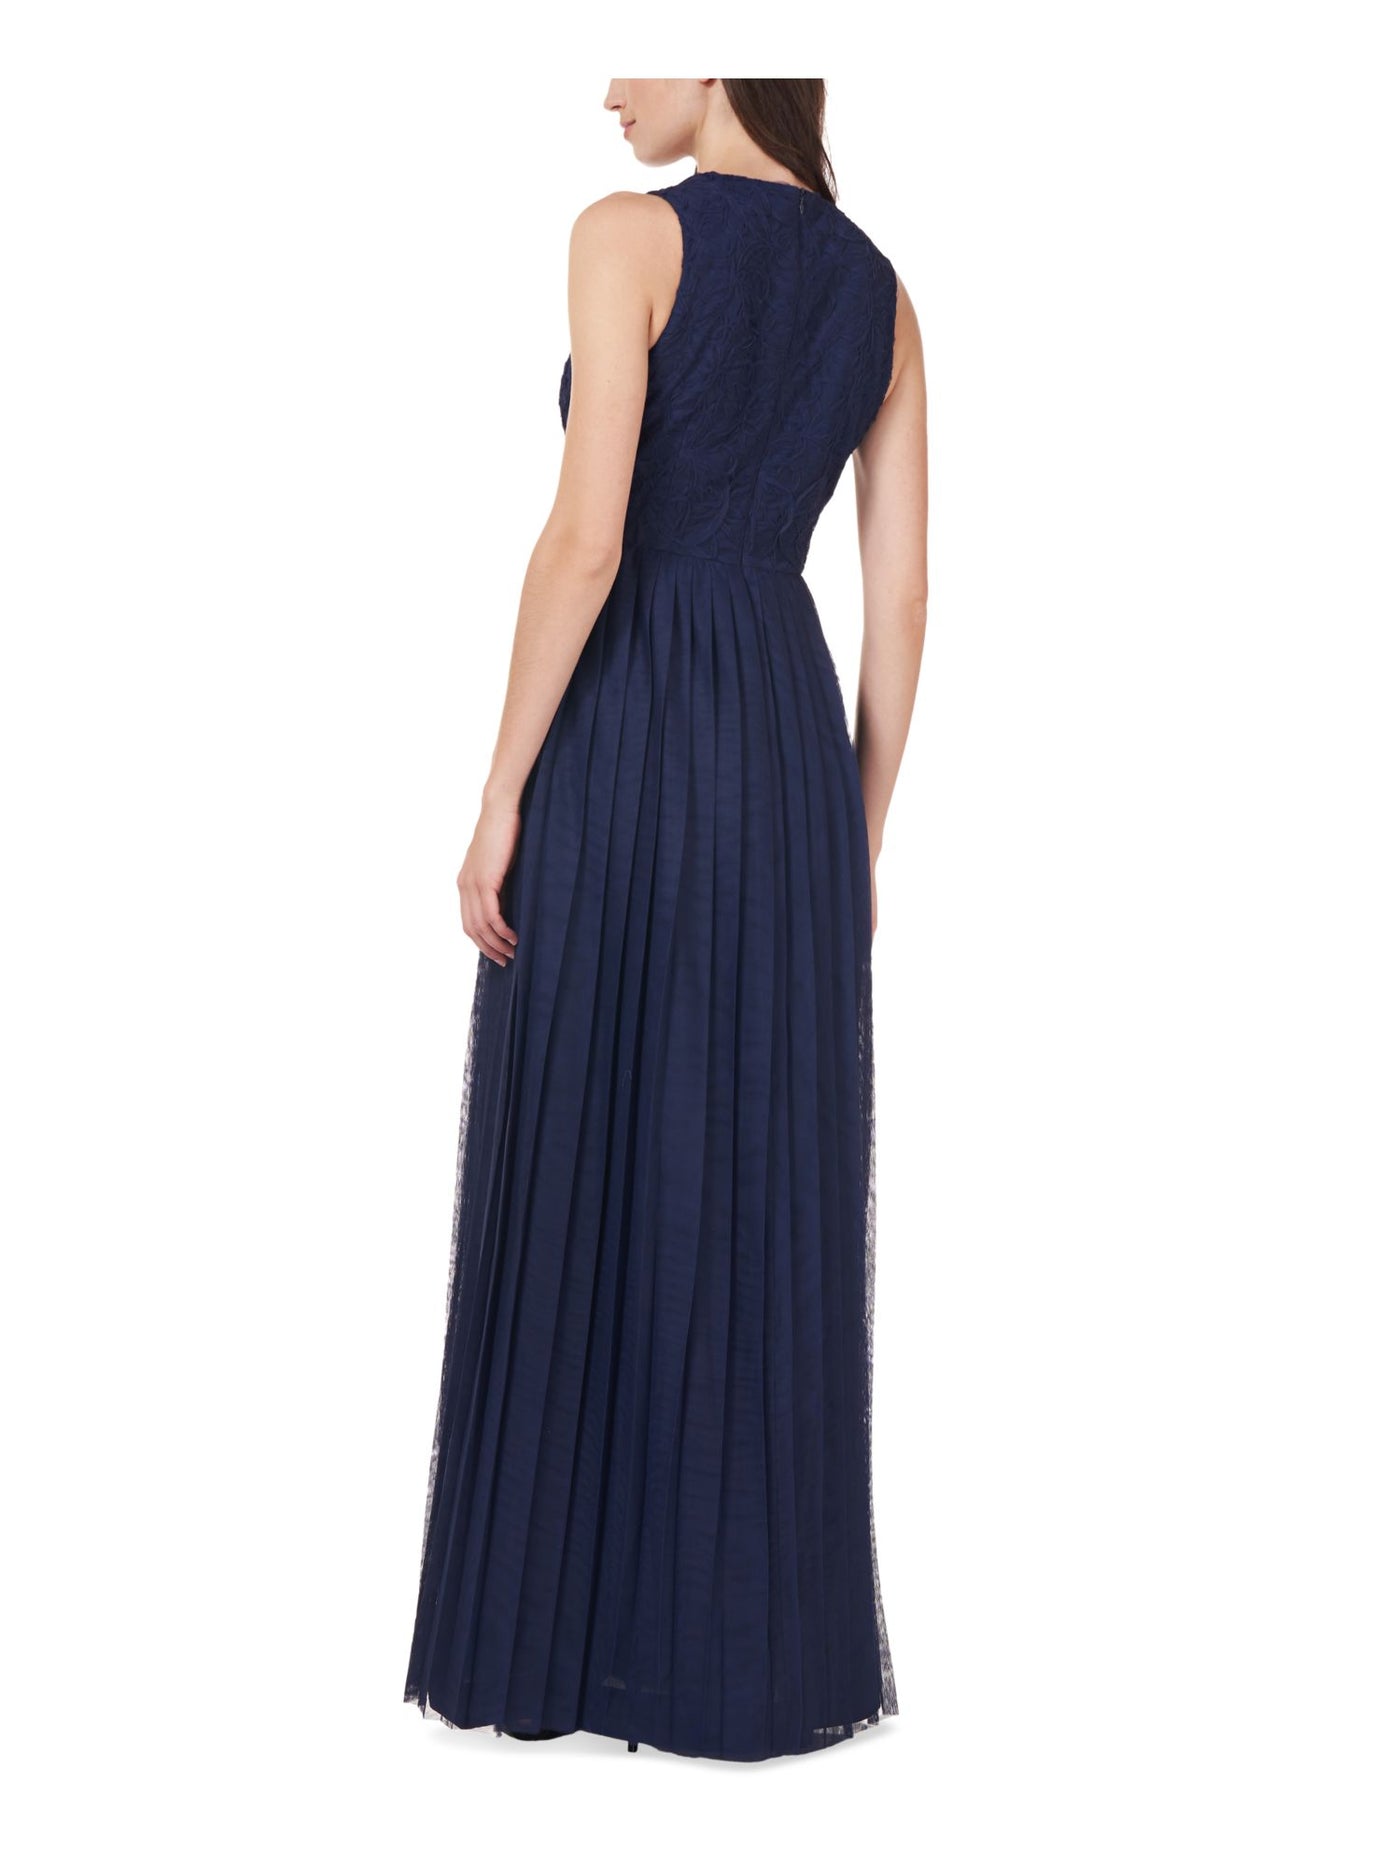 JS COLLECTION Womens Navy Zippered Pleated Sheer Lined Embellished Sleeveless V Neck Full-Length Formal Gown Dress 4